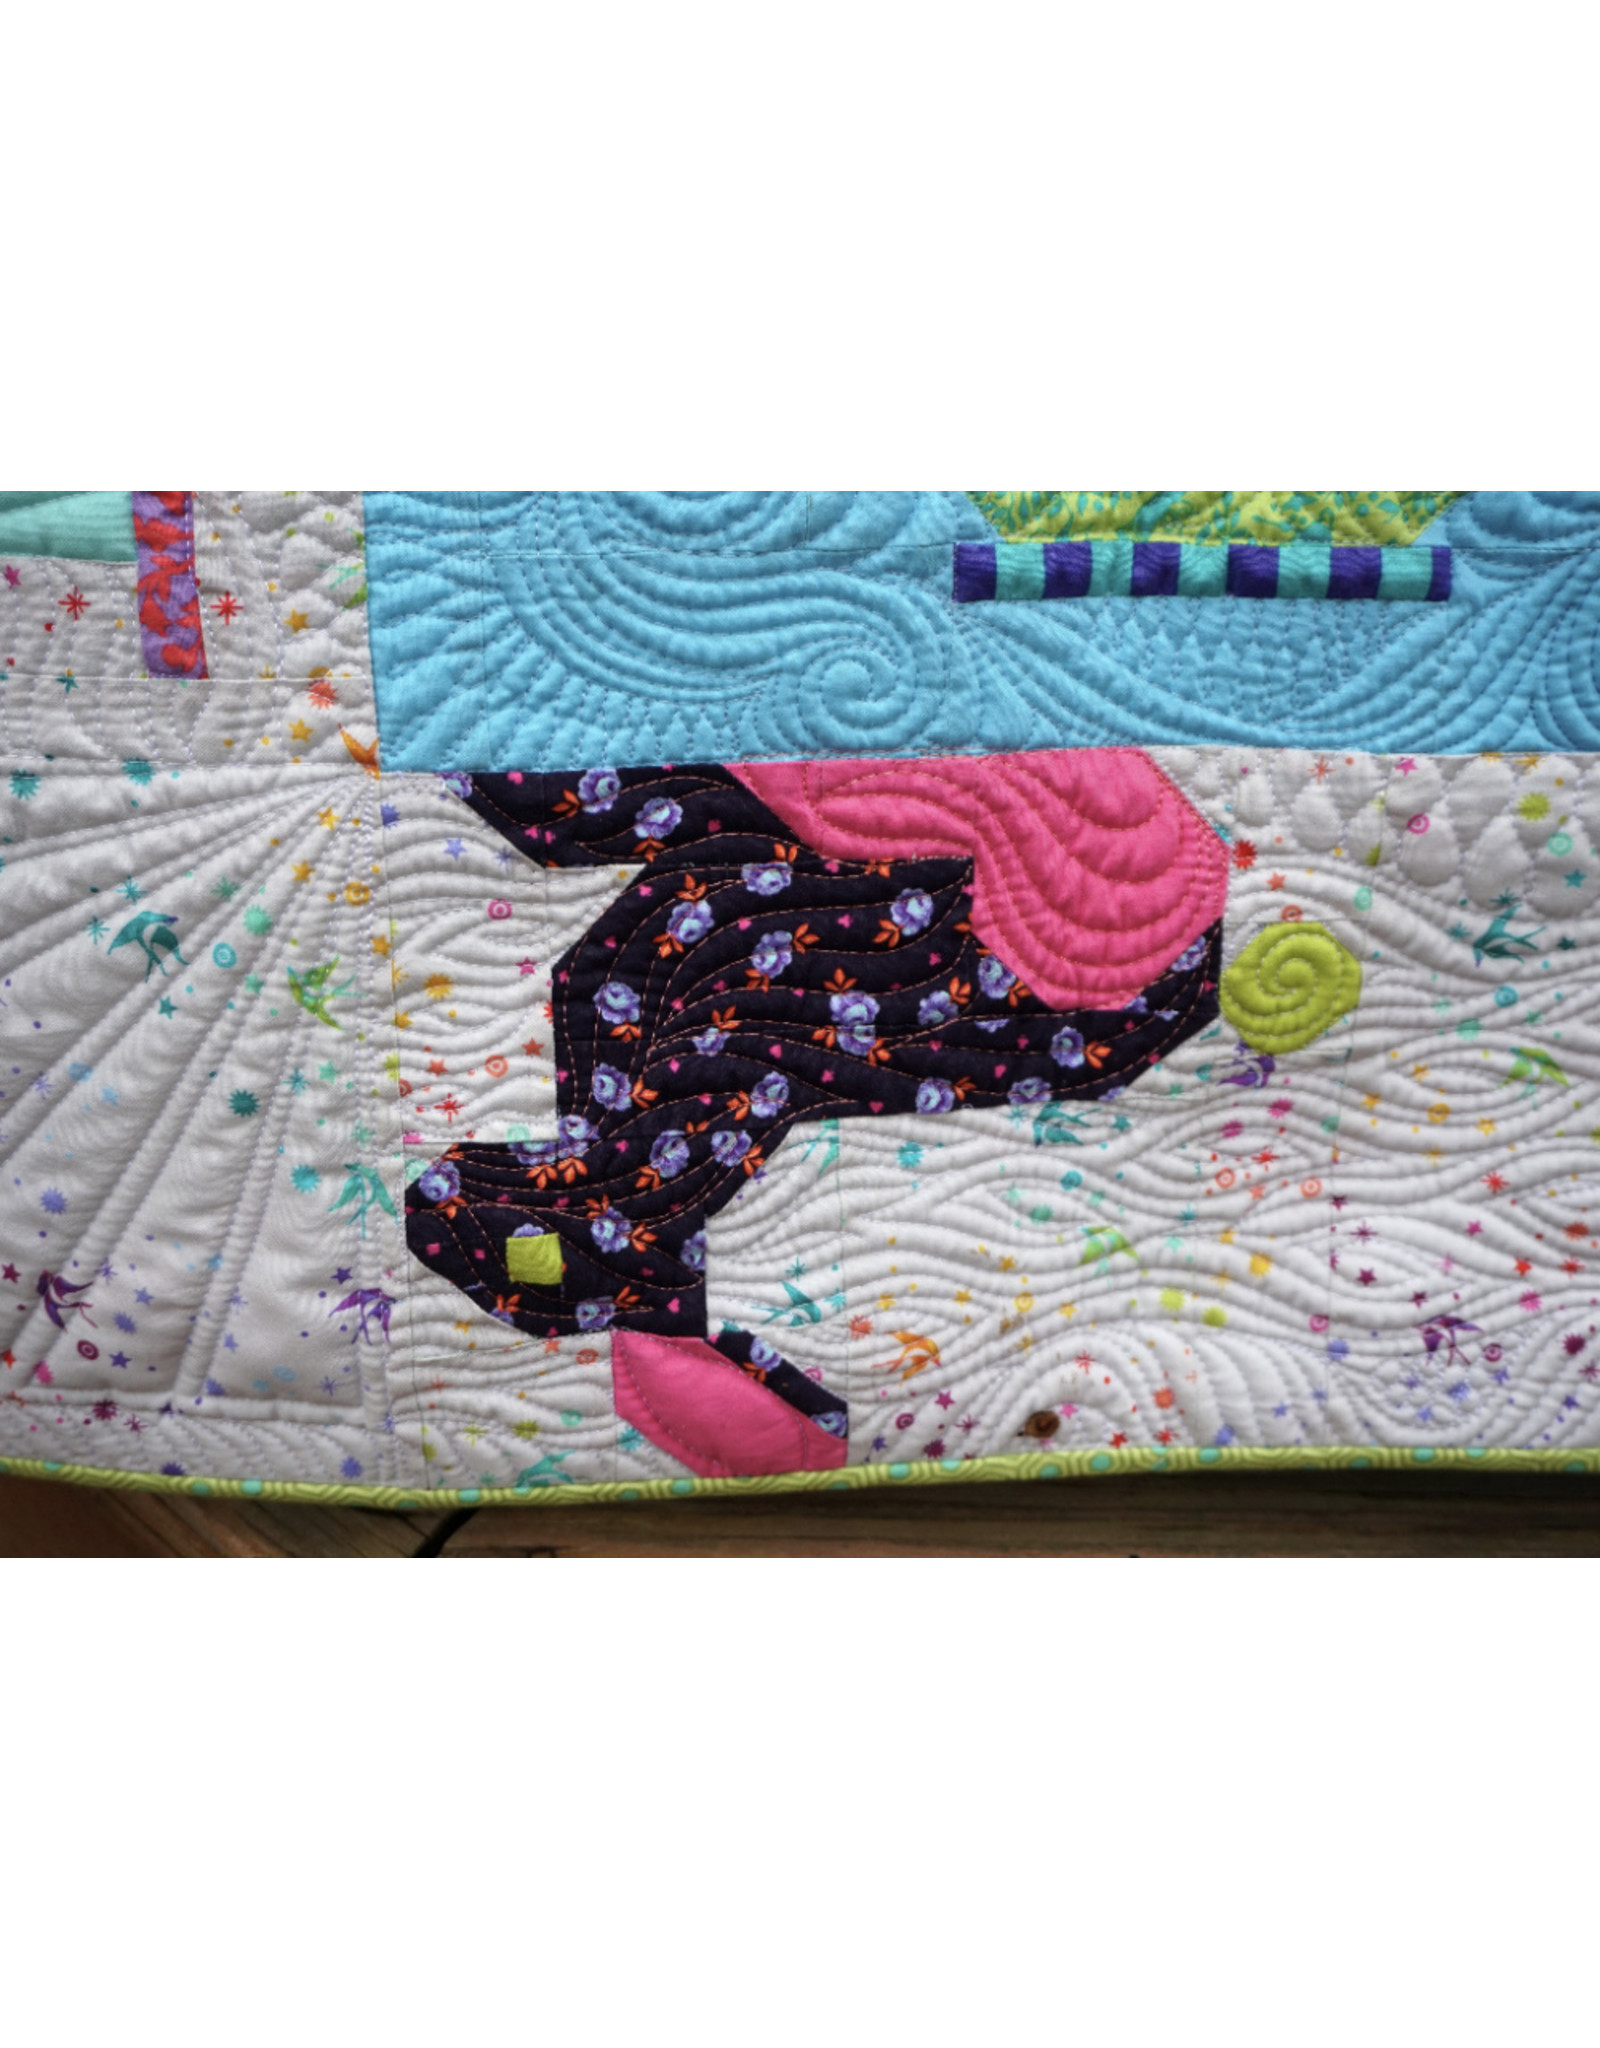 Tula Pink ON SALE-Mad Hatter's Tea Party Quilt Kit, from Tula Pink's Curiouser and Curiouser